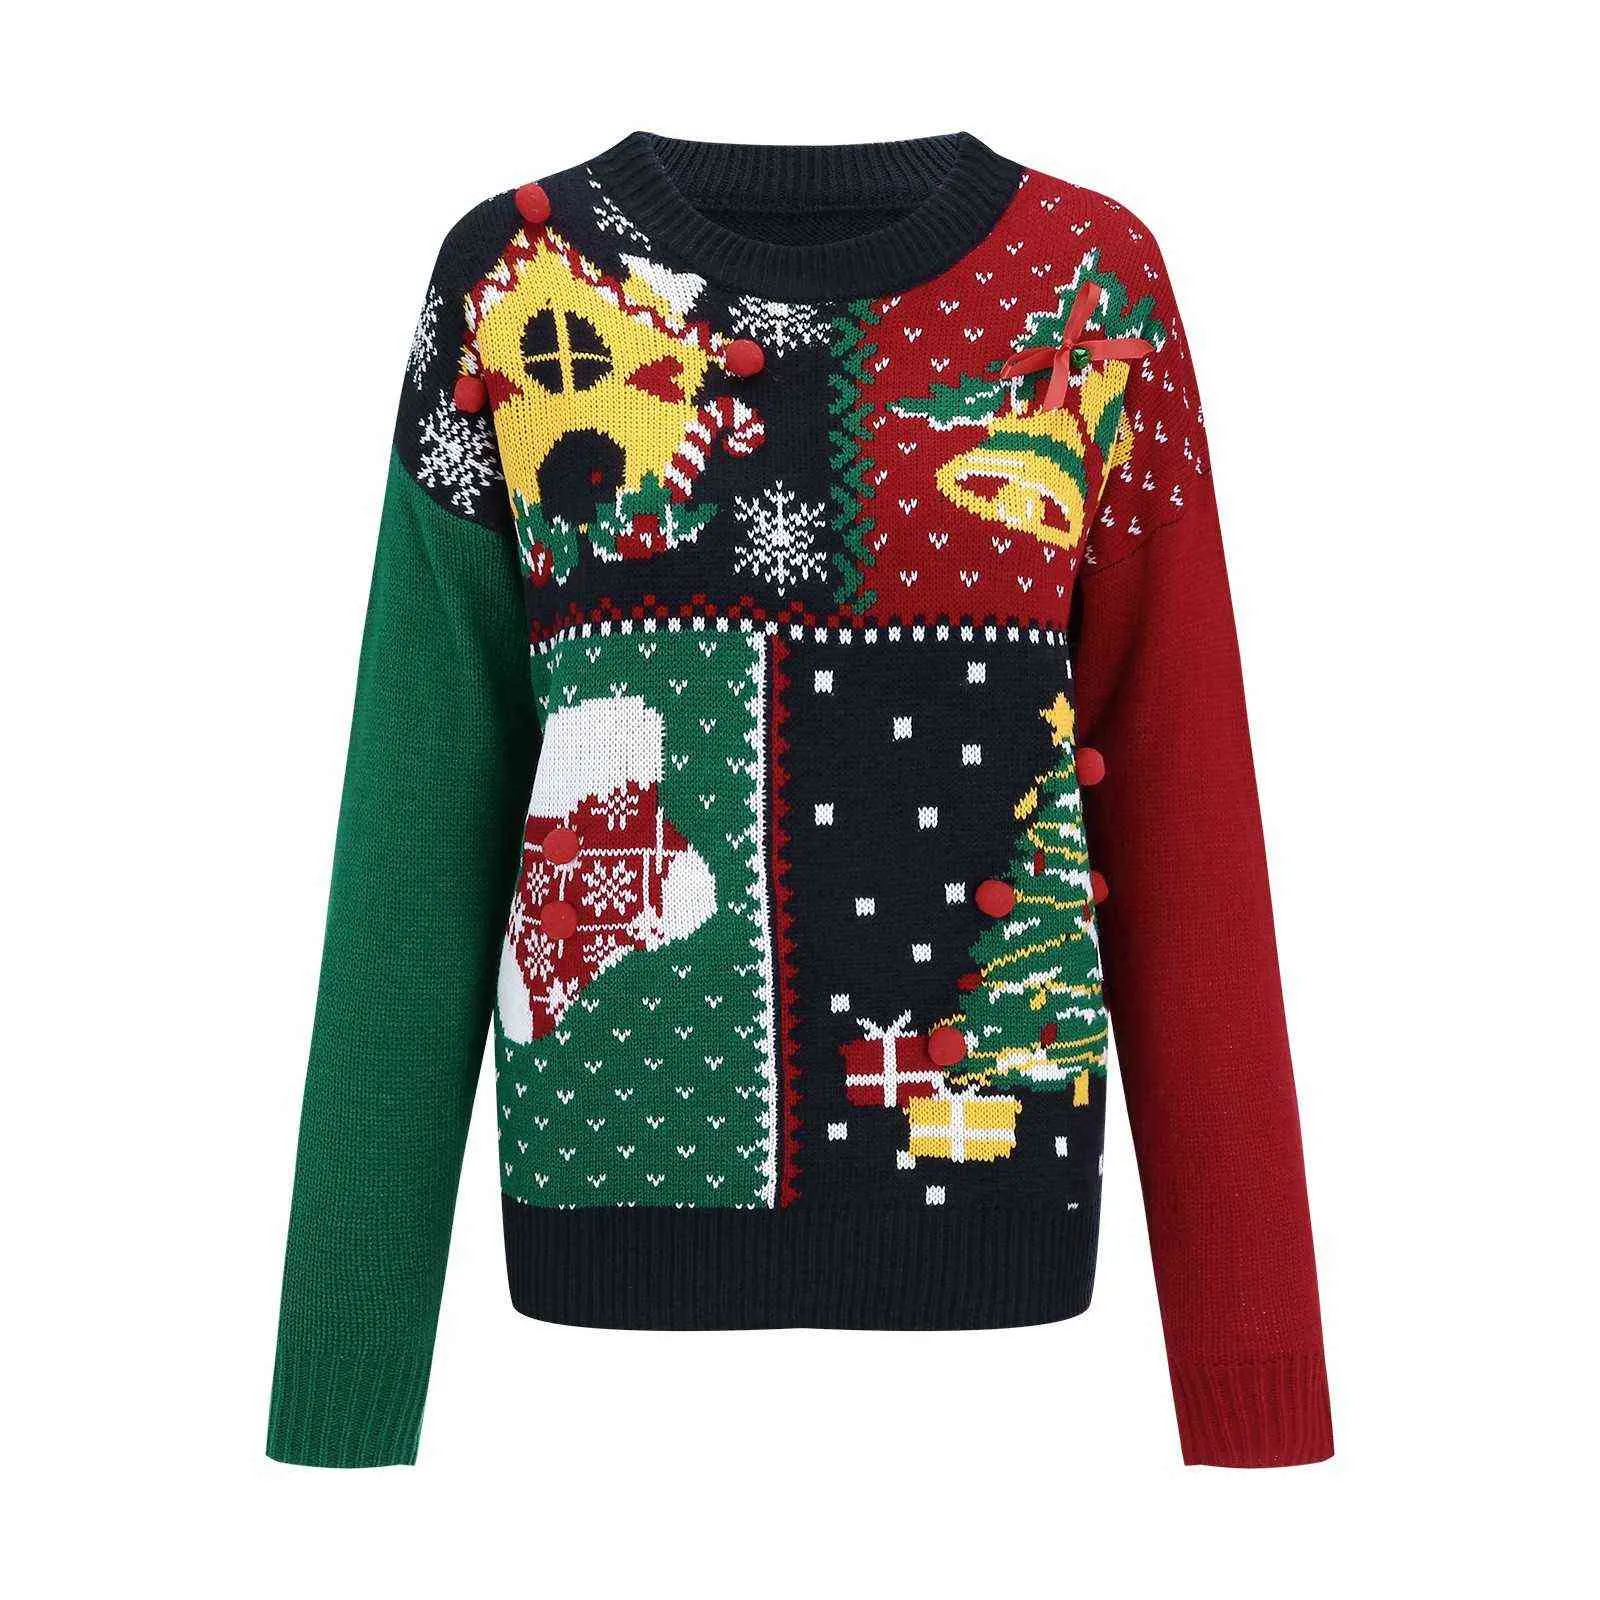 Women's Sweater Ugly Christmas Little Snowflake Knitted Dress And Christmas Tree Sweater With Bells On Chest Female Jumpers Y1118